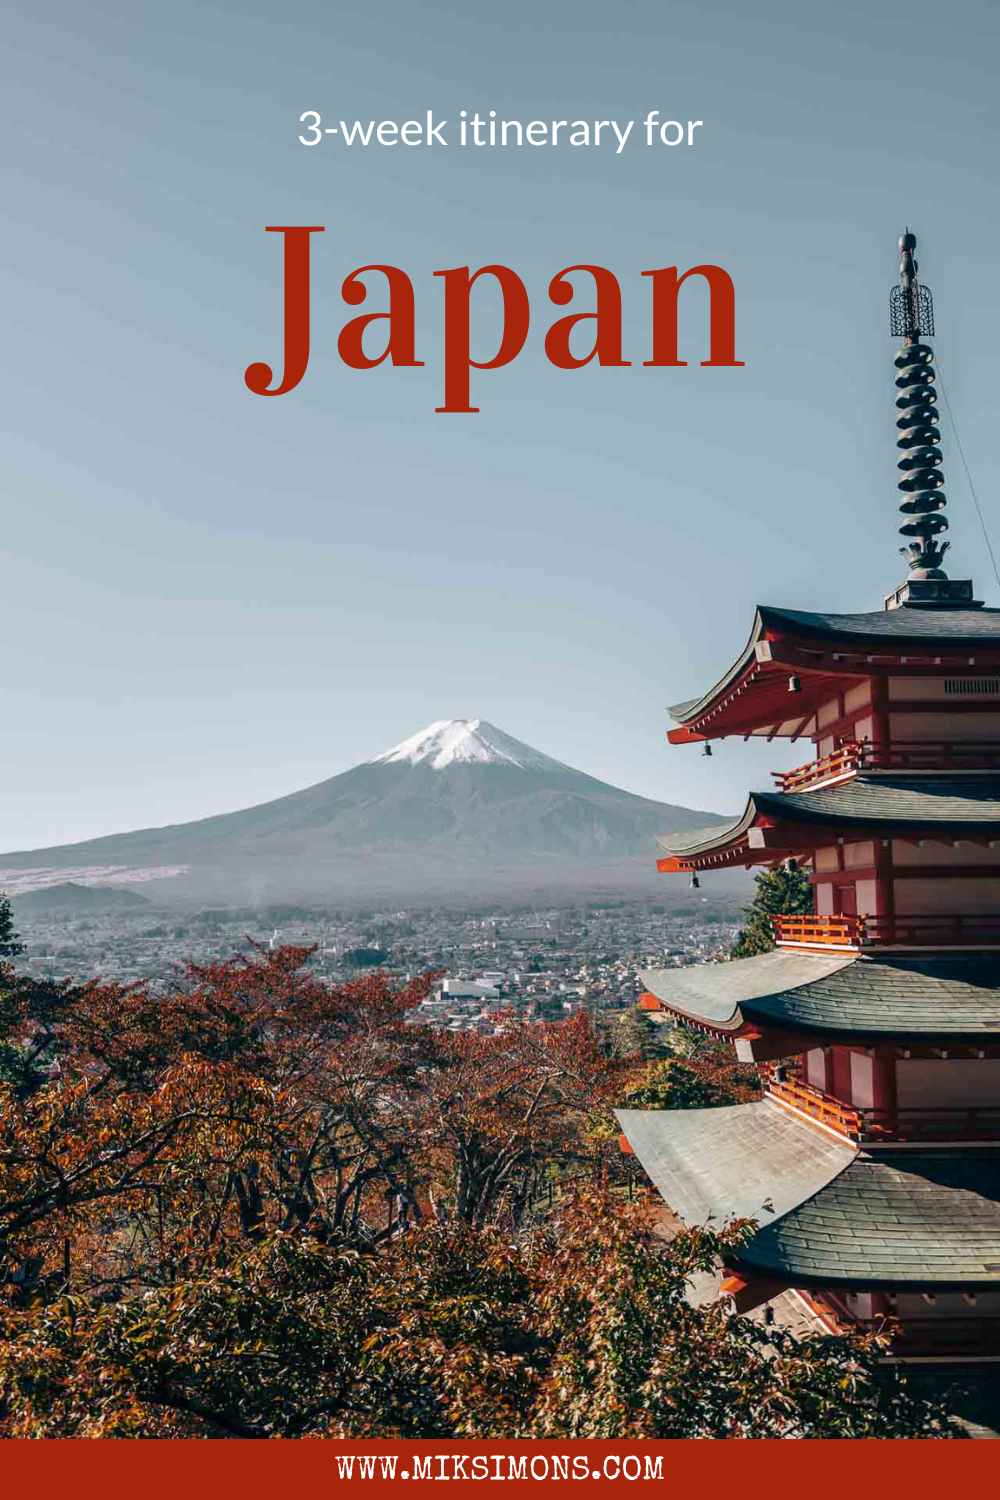 Japan in 3 weeks itinerary1